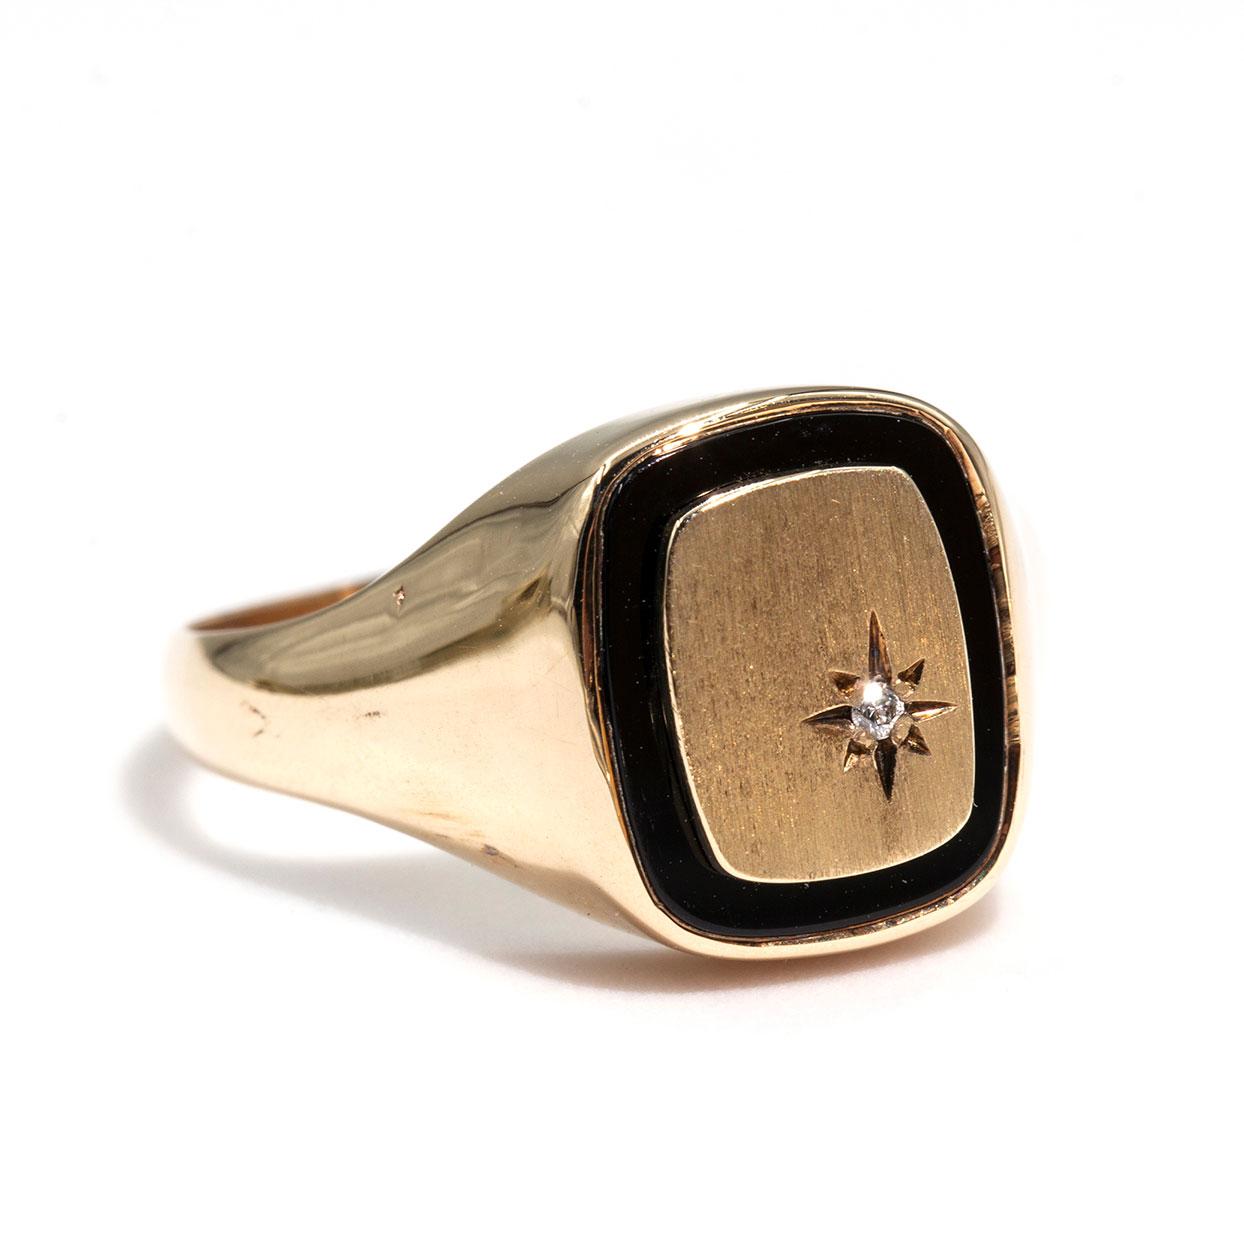 Crafted in 9 carat yellow gold is this handsome vintage mens signet ring featuring a buff top black onyx with a gold plate sitting on top with a star set round brilliant cut diamond. We have named this dapper piece The Riley Ring. The Riley Ring has